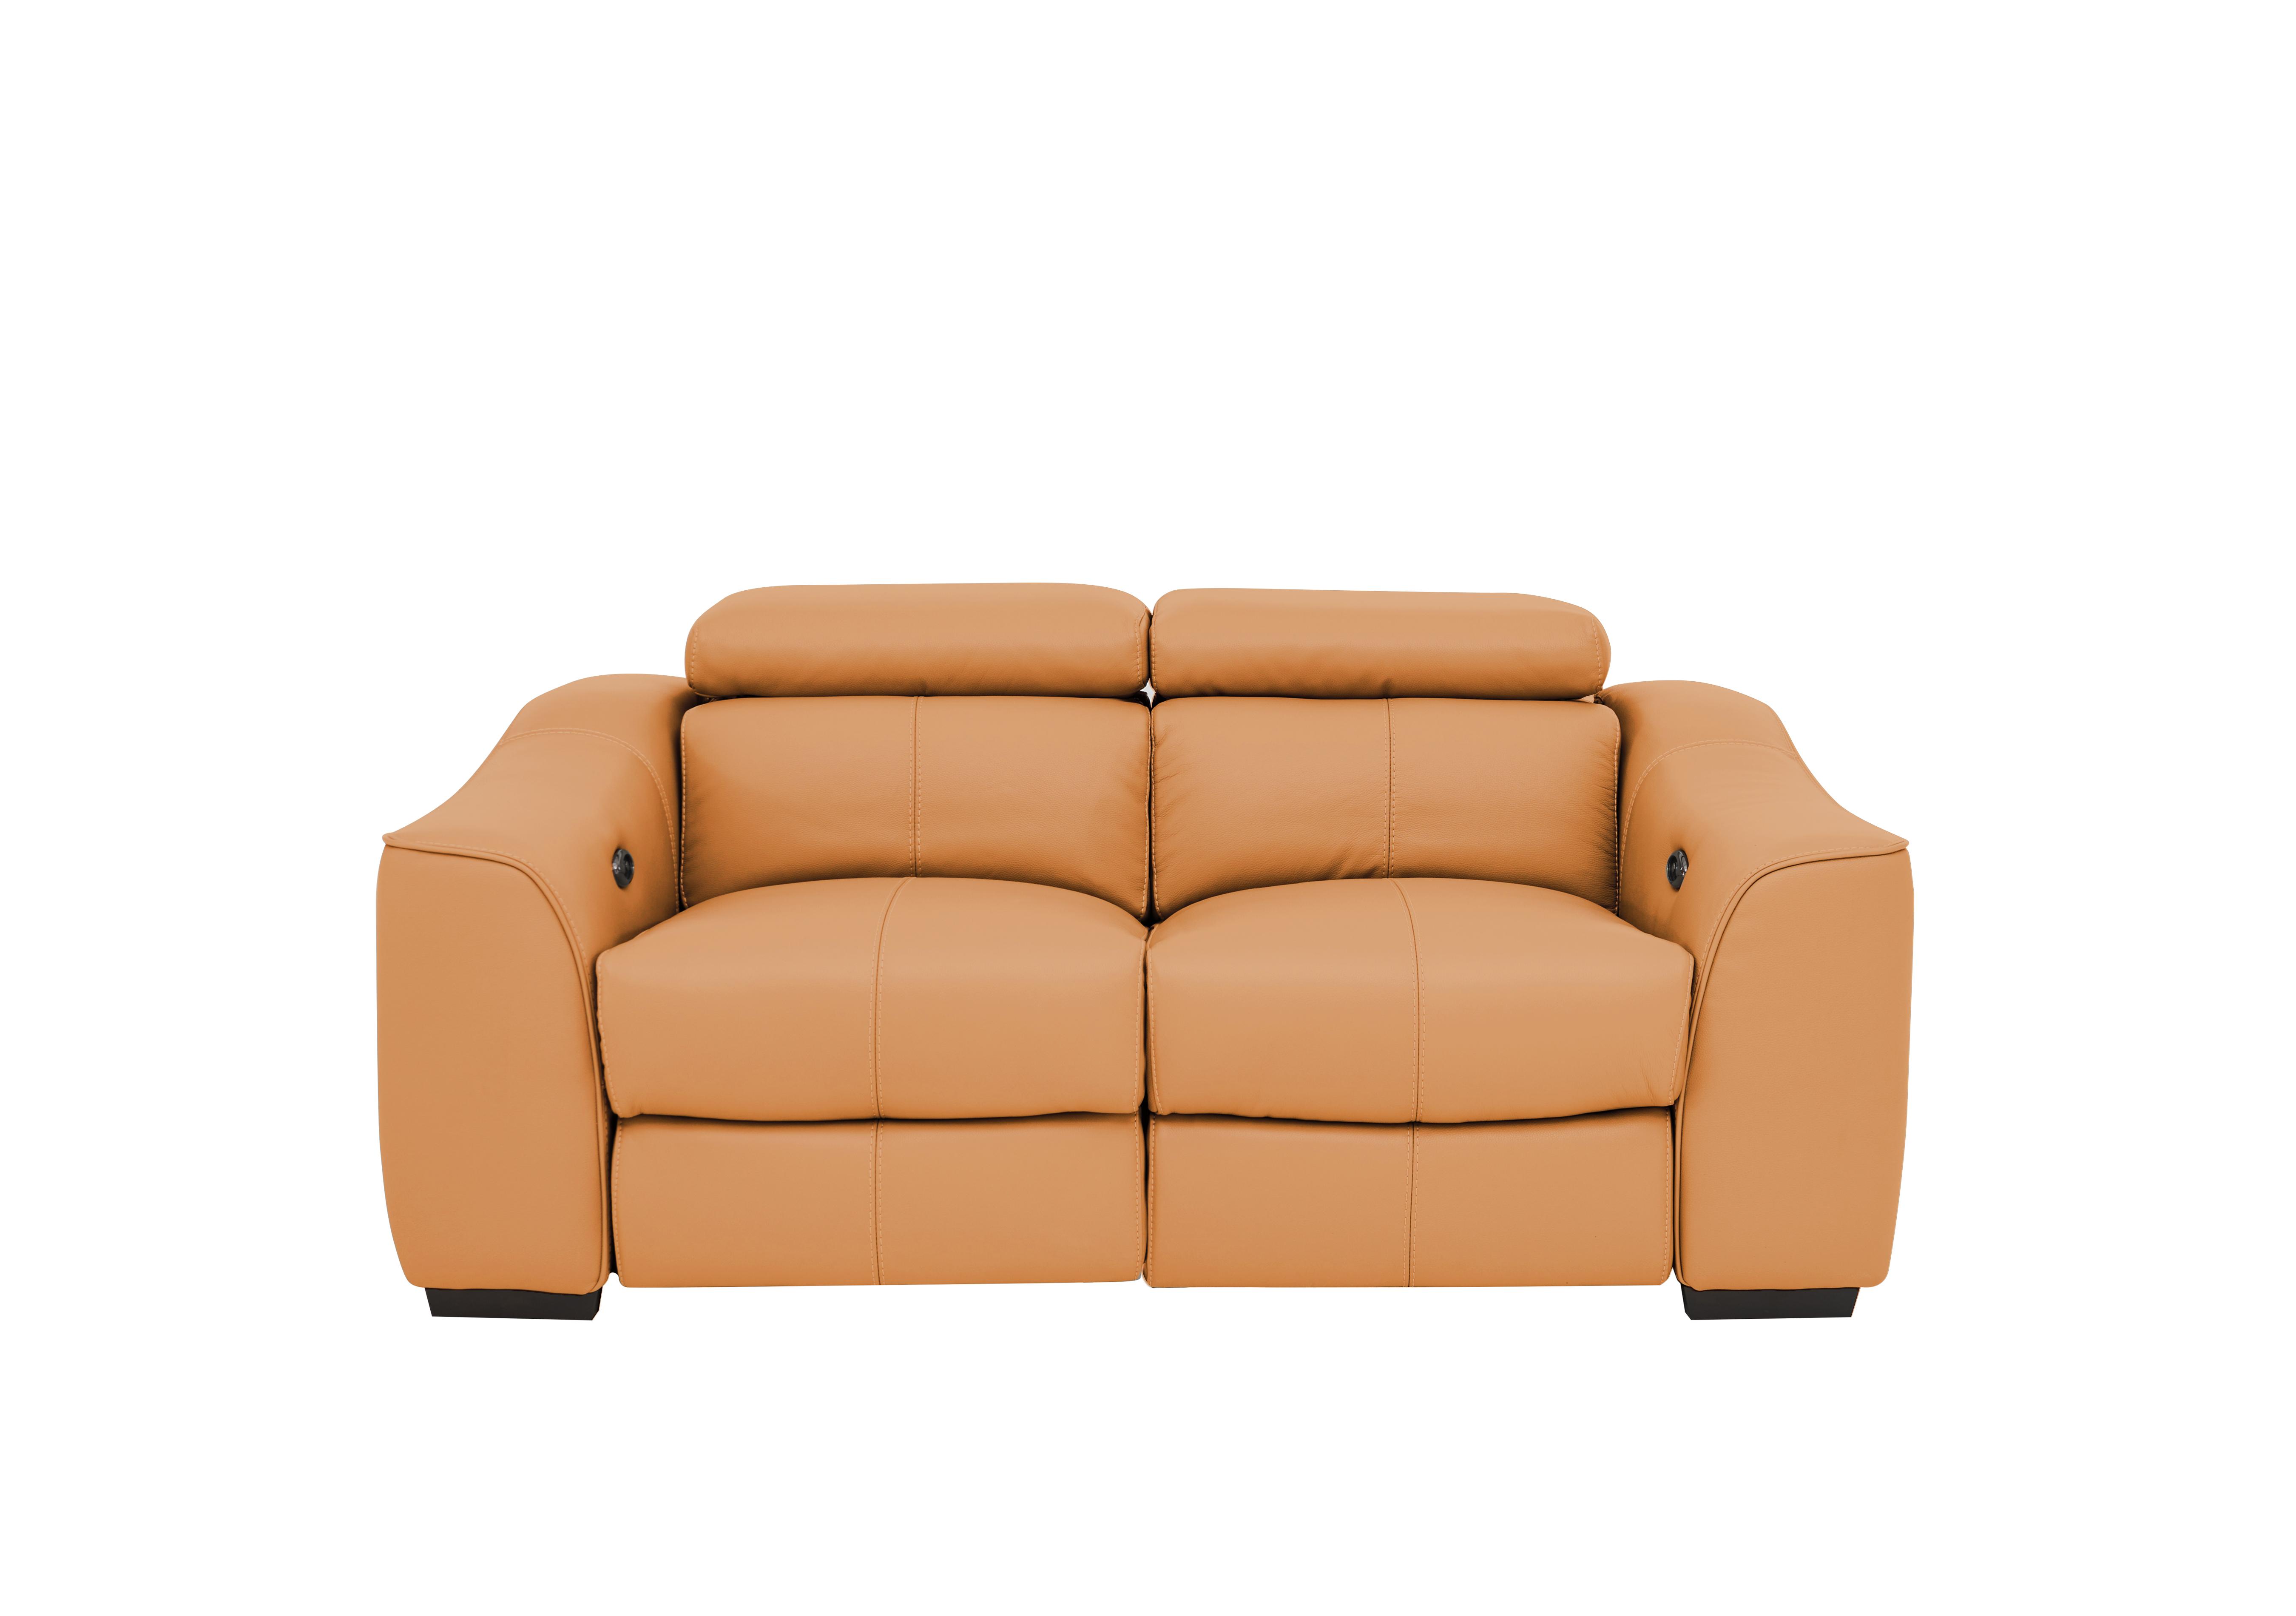 Elixir 2 Seater Leather Sofa in Bv-335e Honey Yellow on Furniture Village